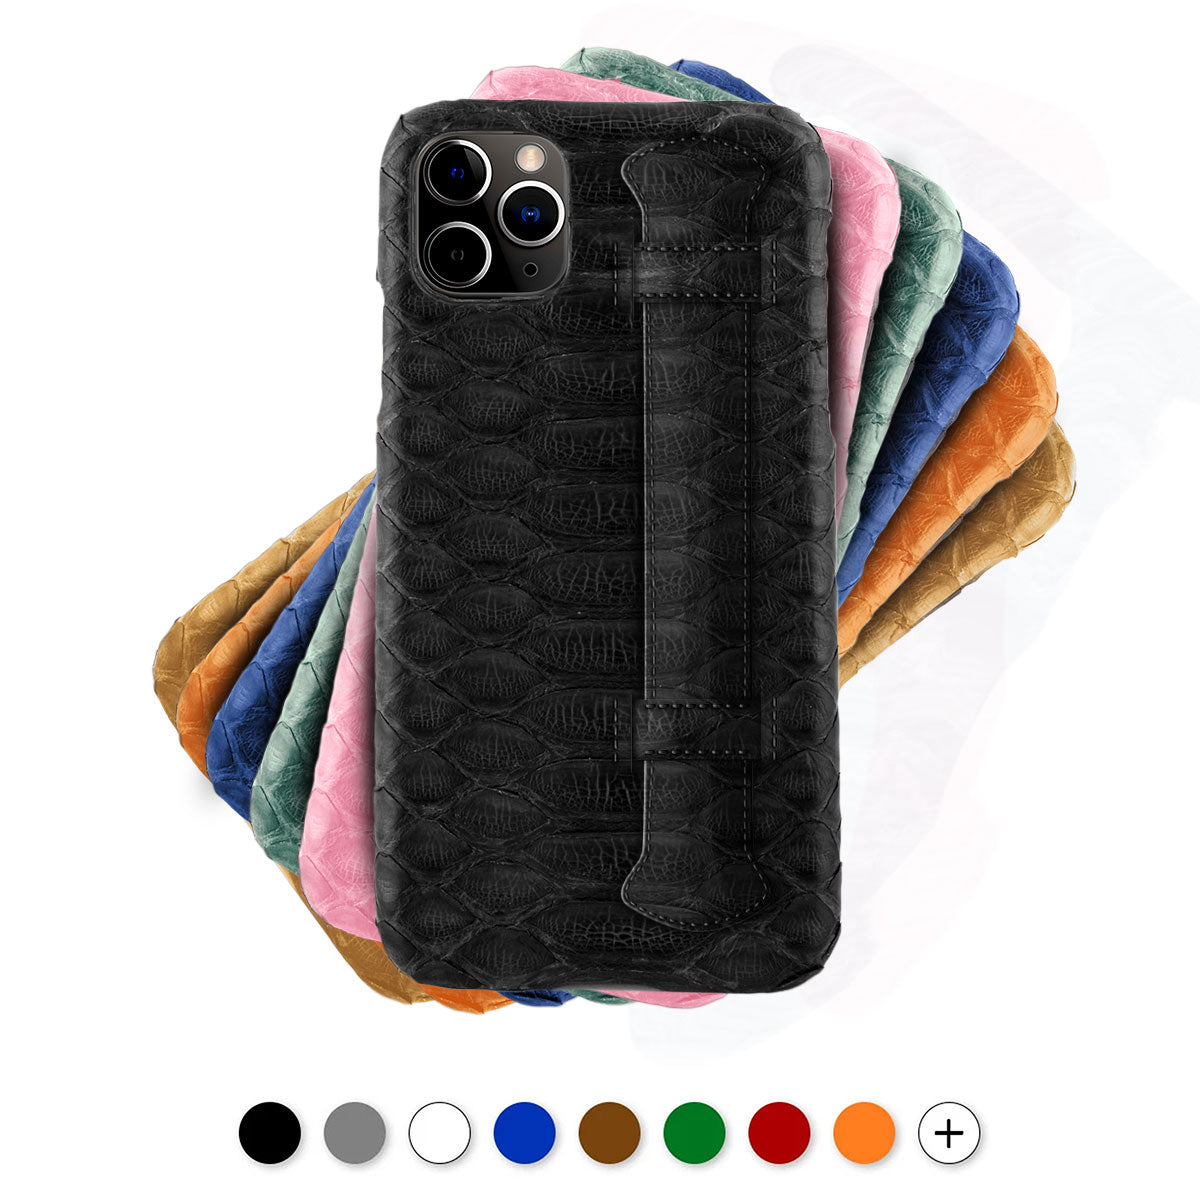 Leather iPhone " Strap case " with handle - iPhone 12 & 11 ( Pro / Max / Mini ) - Genuine Python